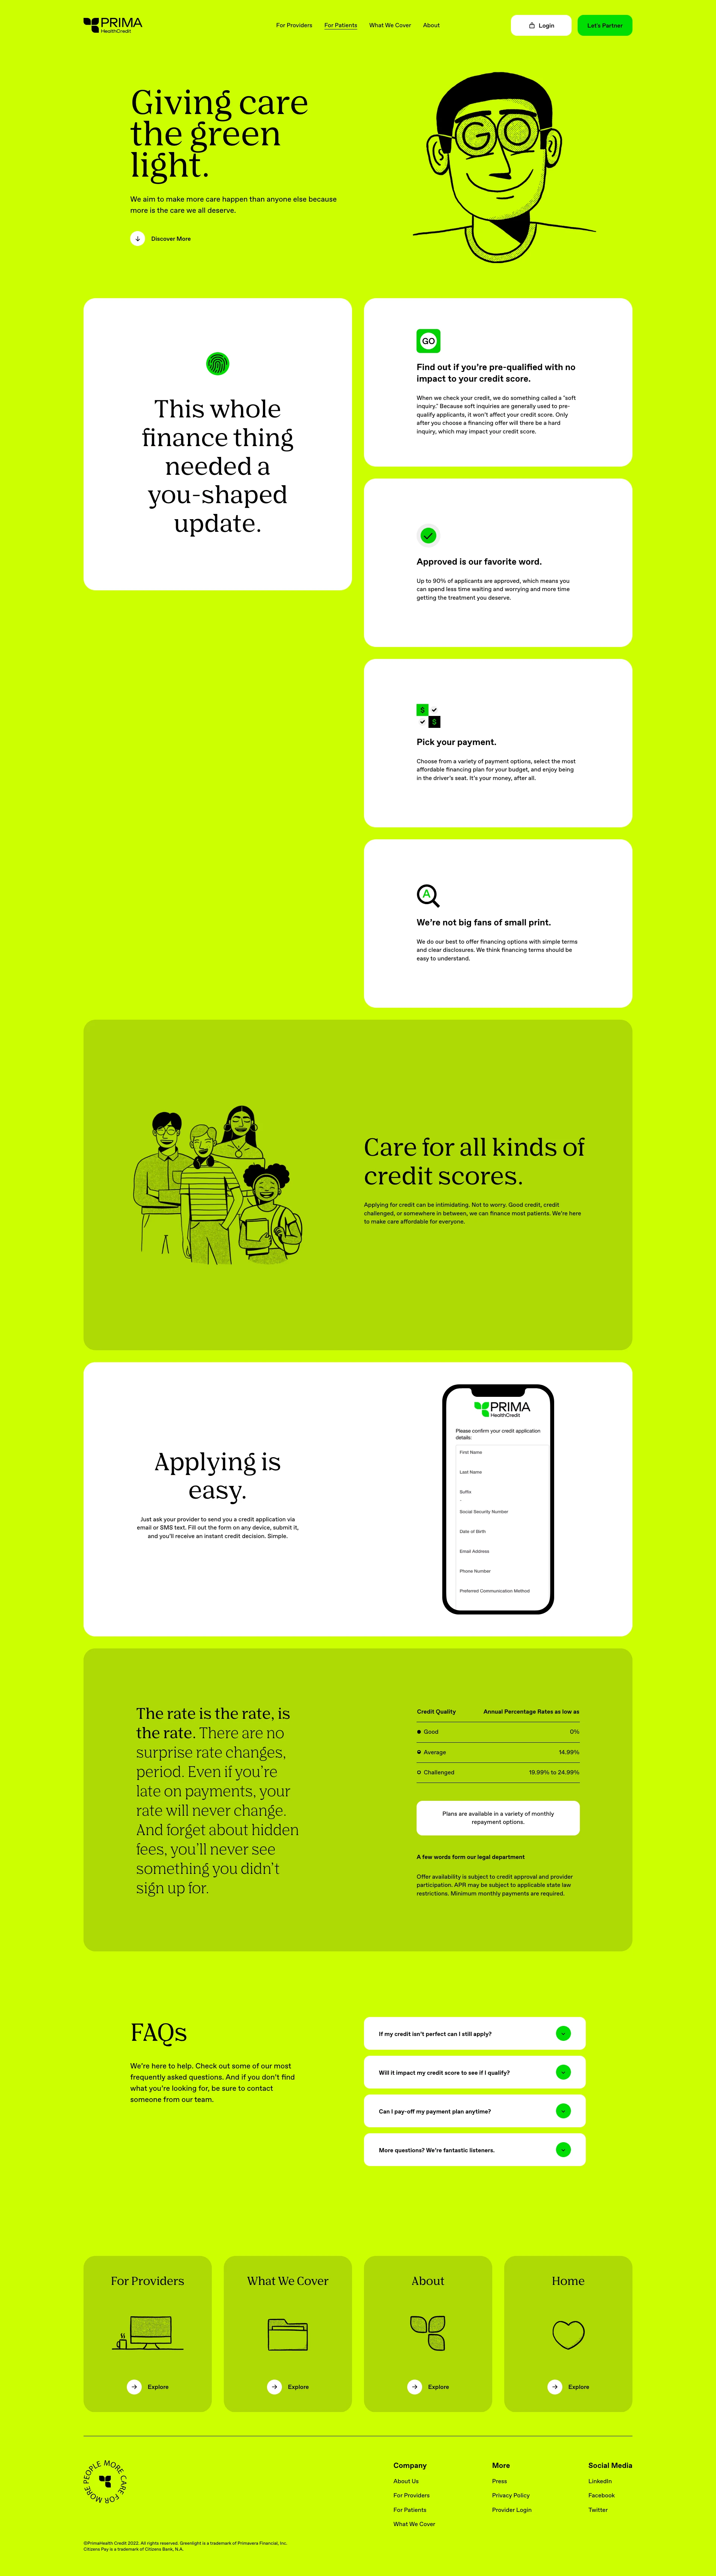 PrimaHealth Credit Landing Page Example: We help more patients access the healthcare they need by offering affordable monthly payment options and a total patient finance solution to healthcare providers.